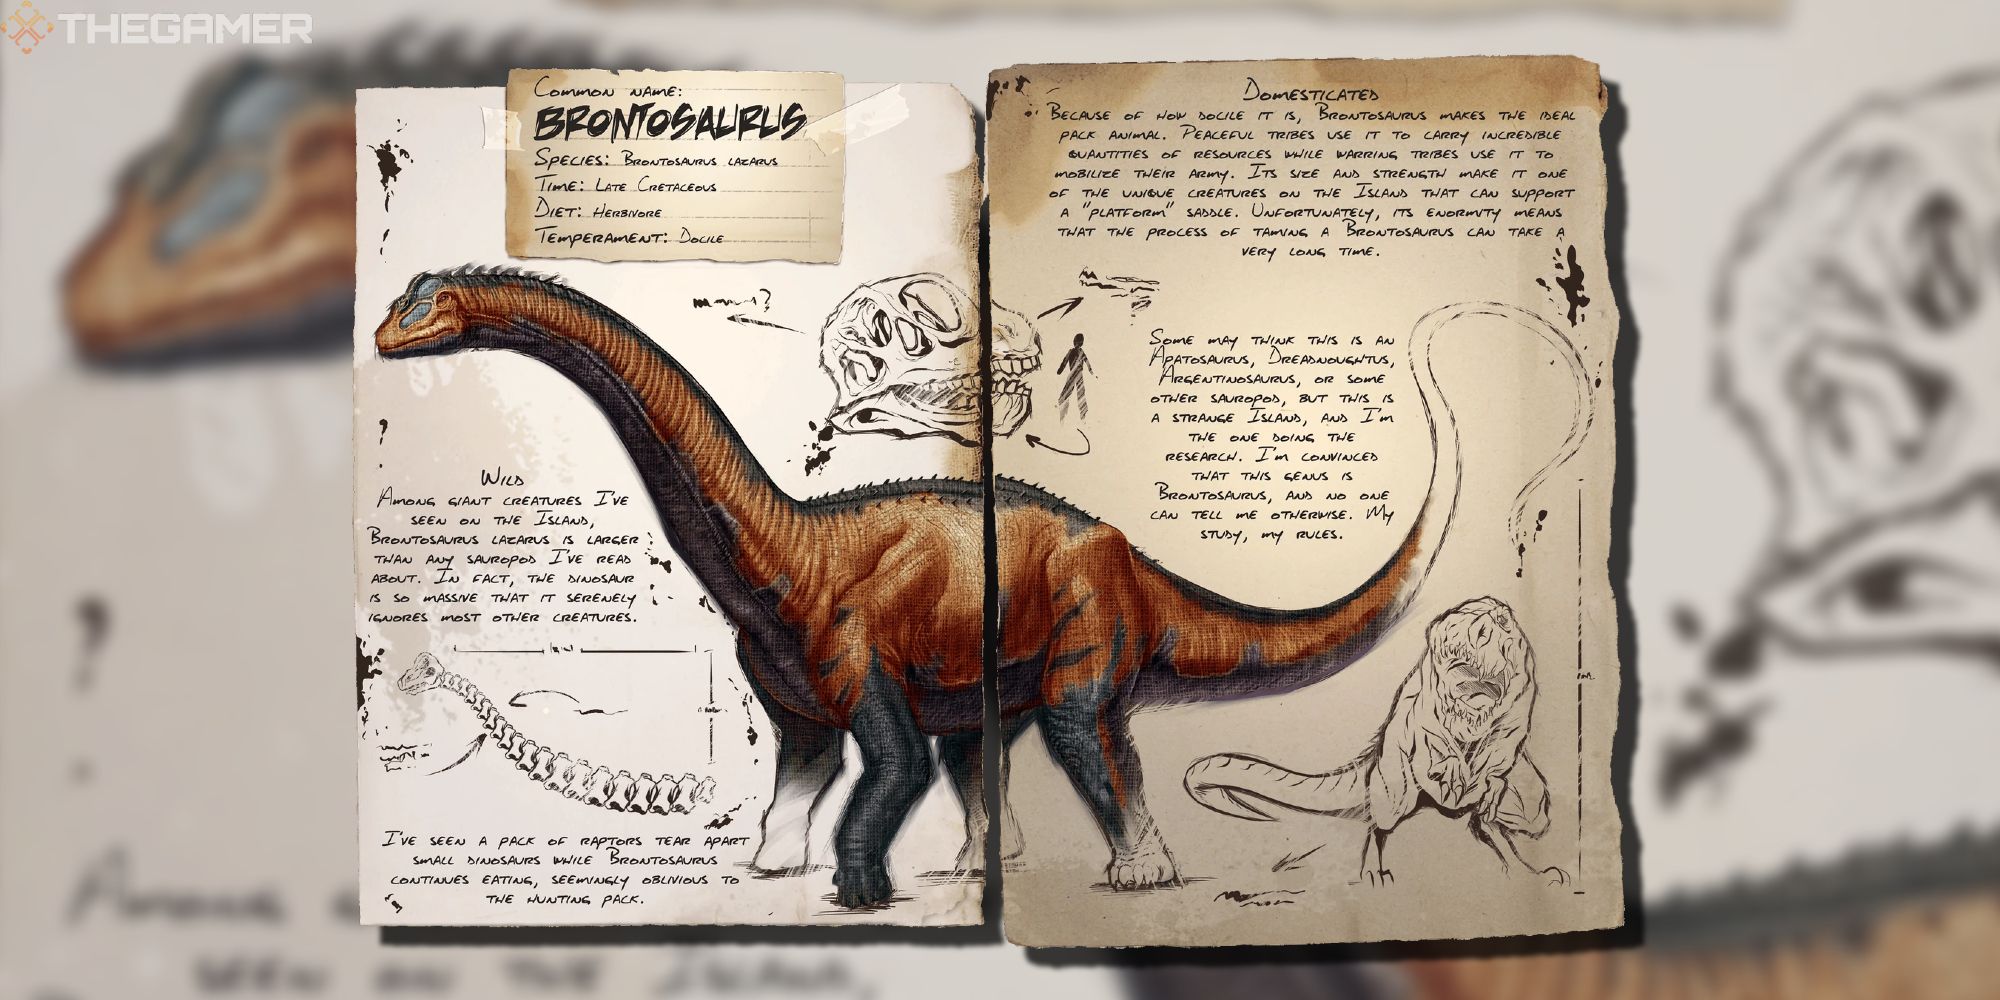 dossier entry for the brontosaurus in ark survival